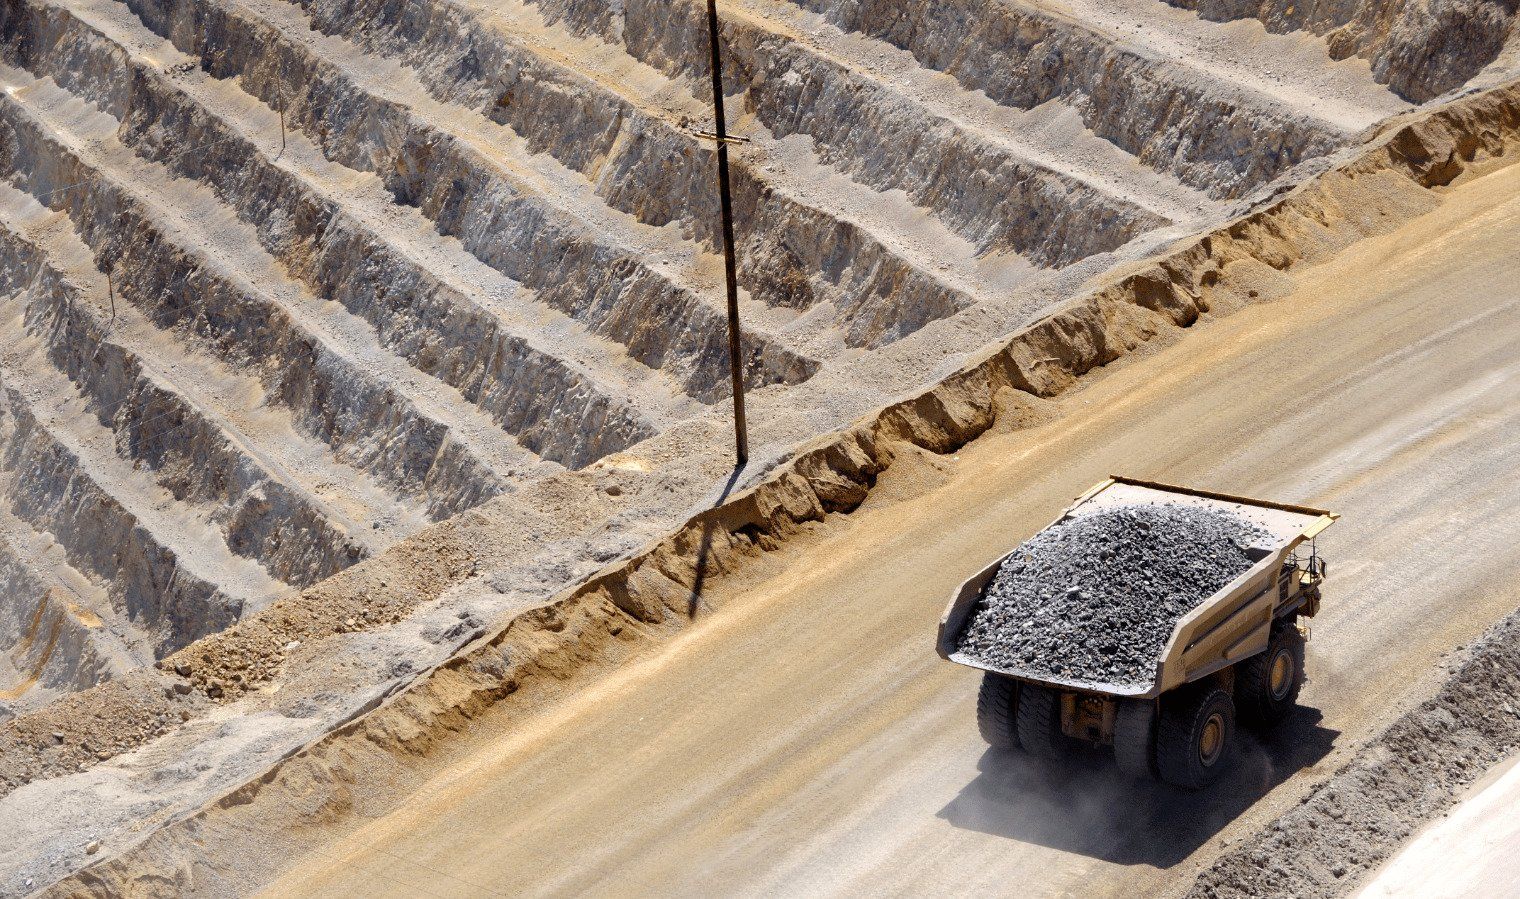 A large dumper truck carrying a load of stones through a quarry